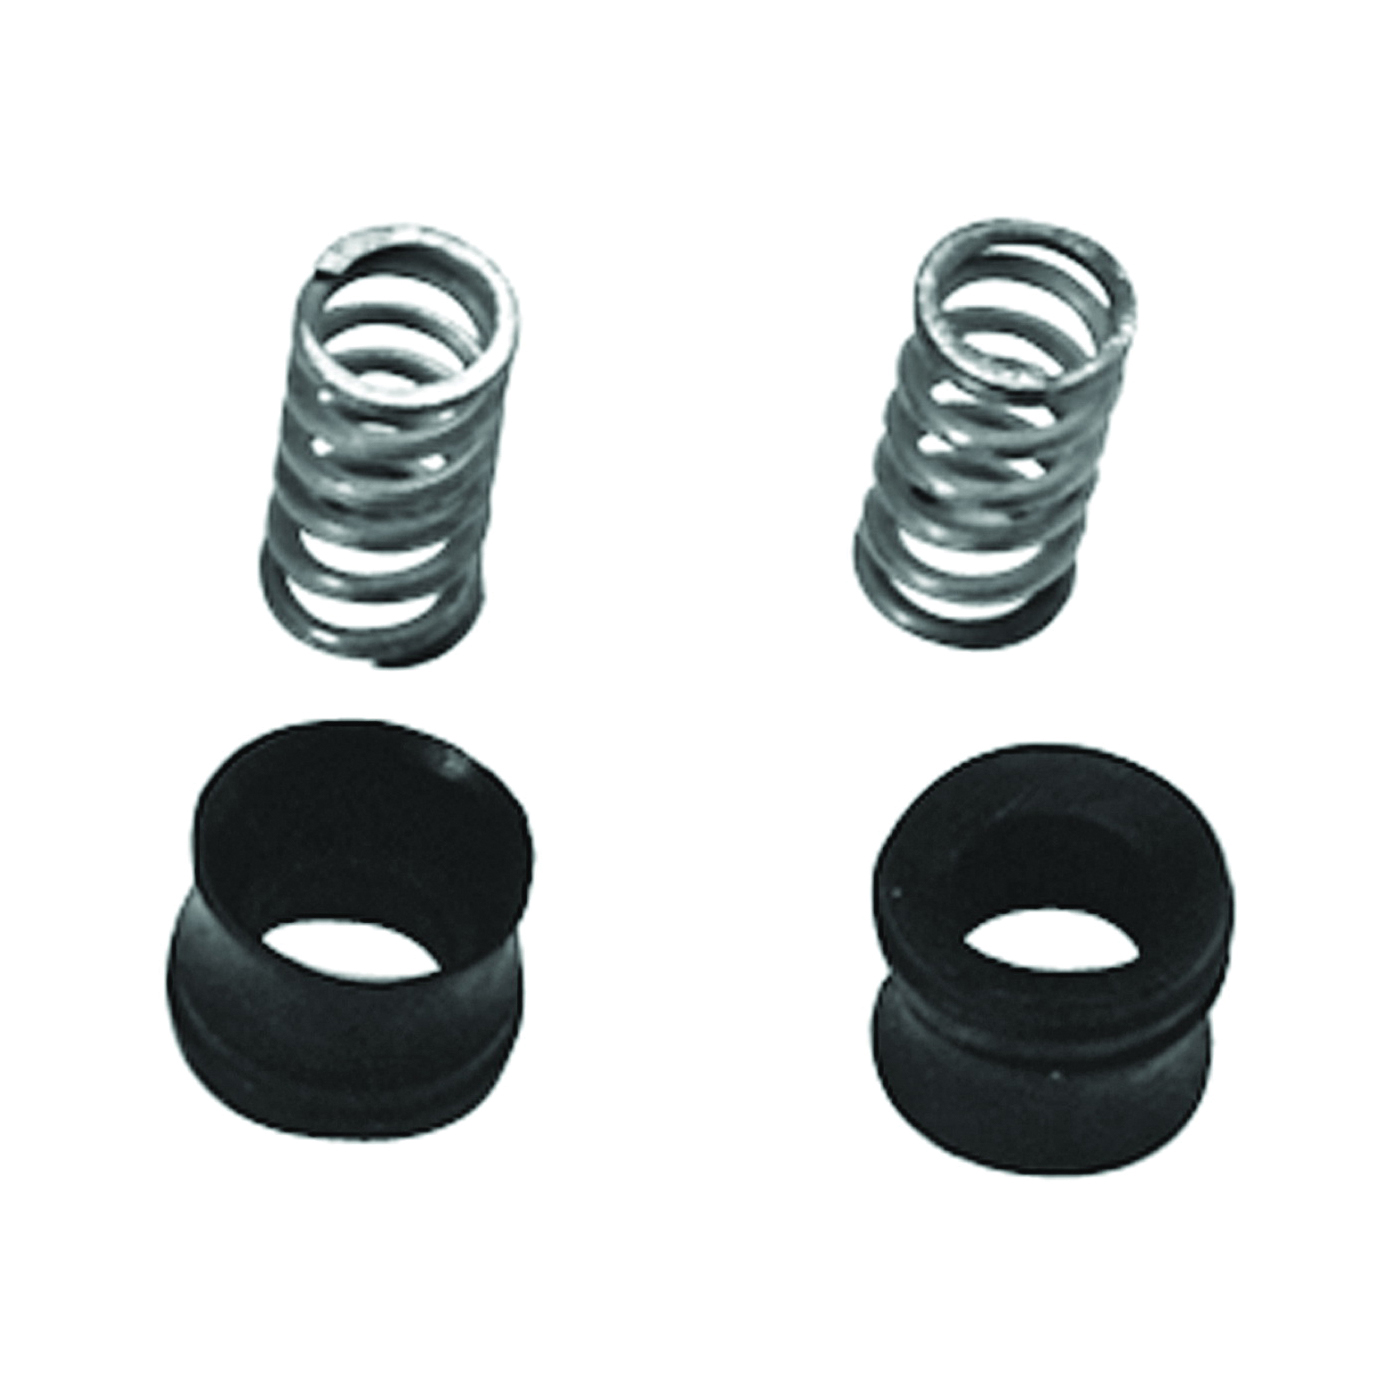 DL-4 Series 80703 Seat and Spring Kit, Rubber/Stainless Steel, Black